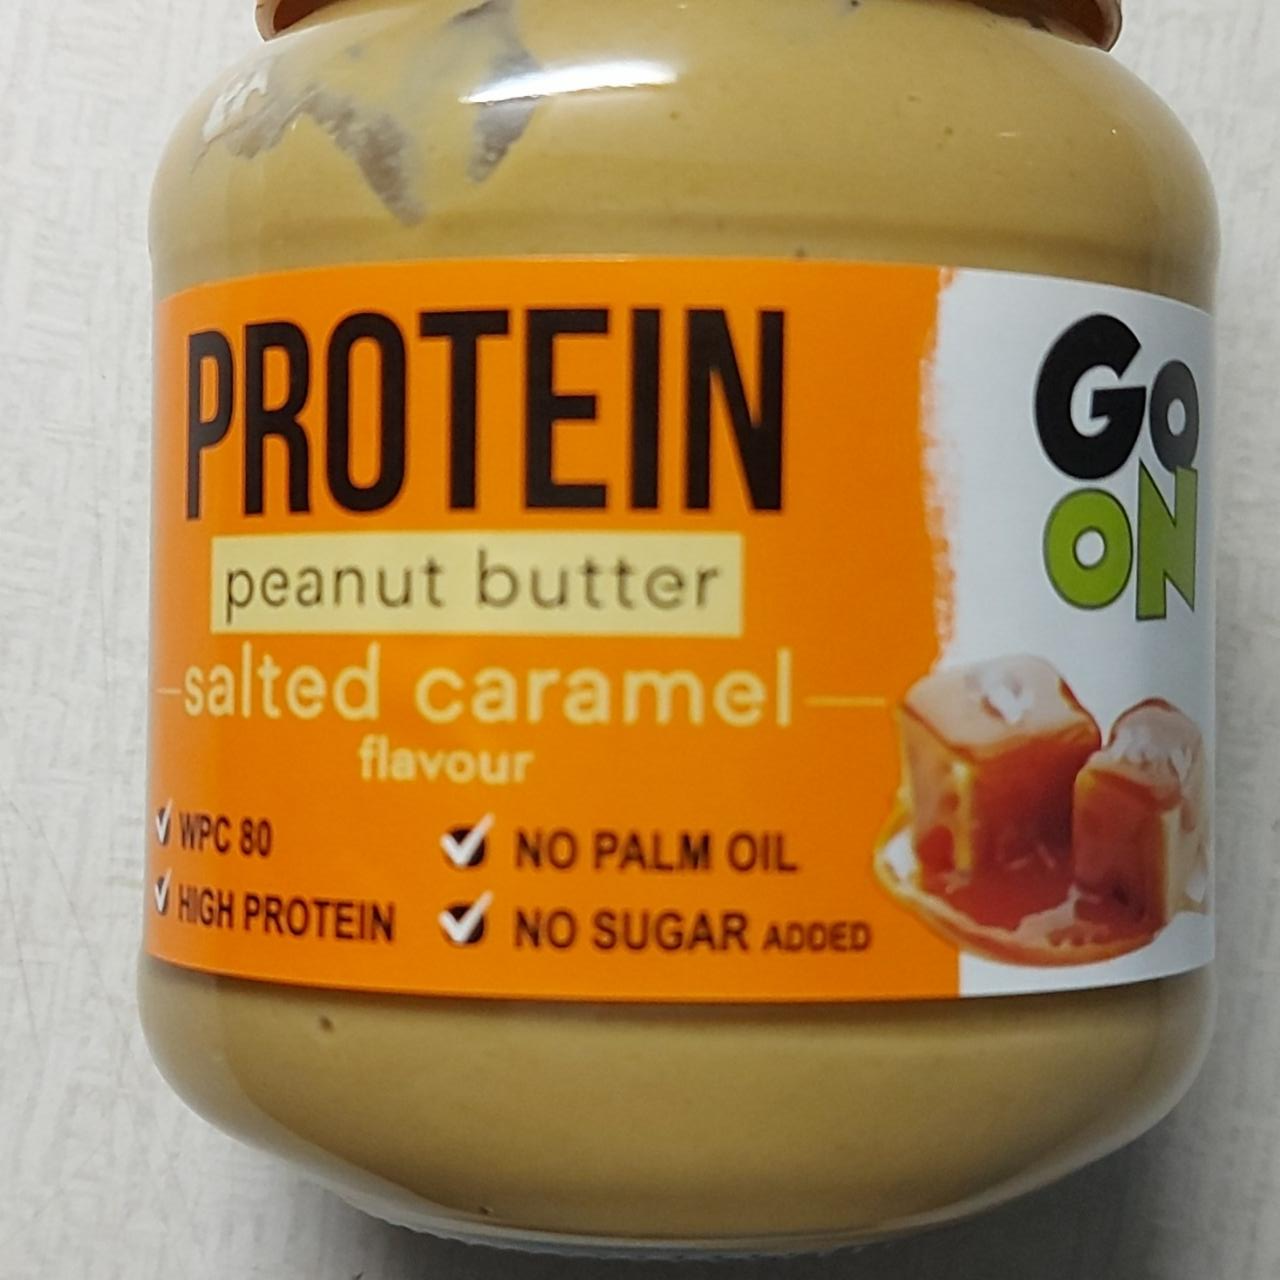 Fotografie - Protein penaut butter Salted caramel Go On